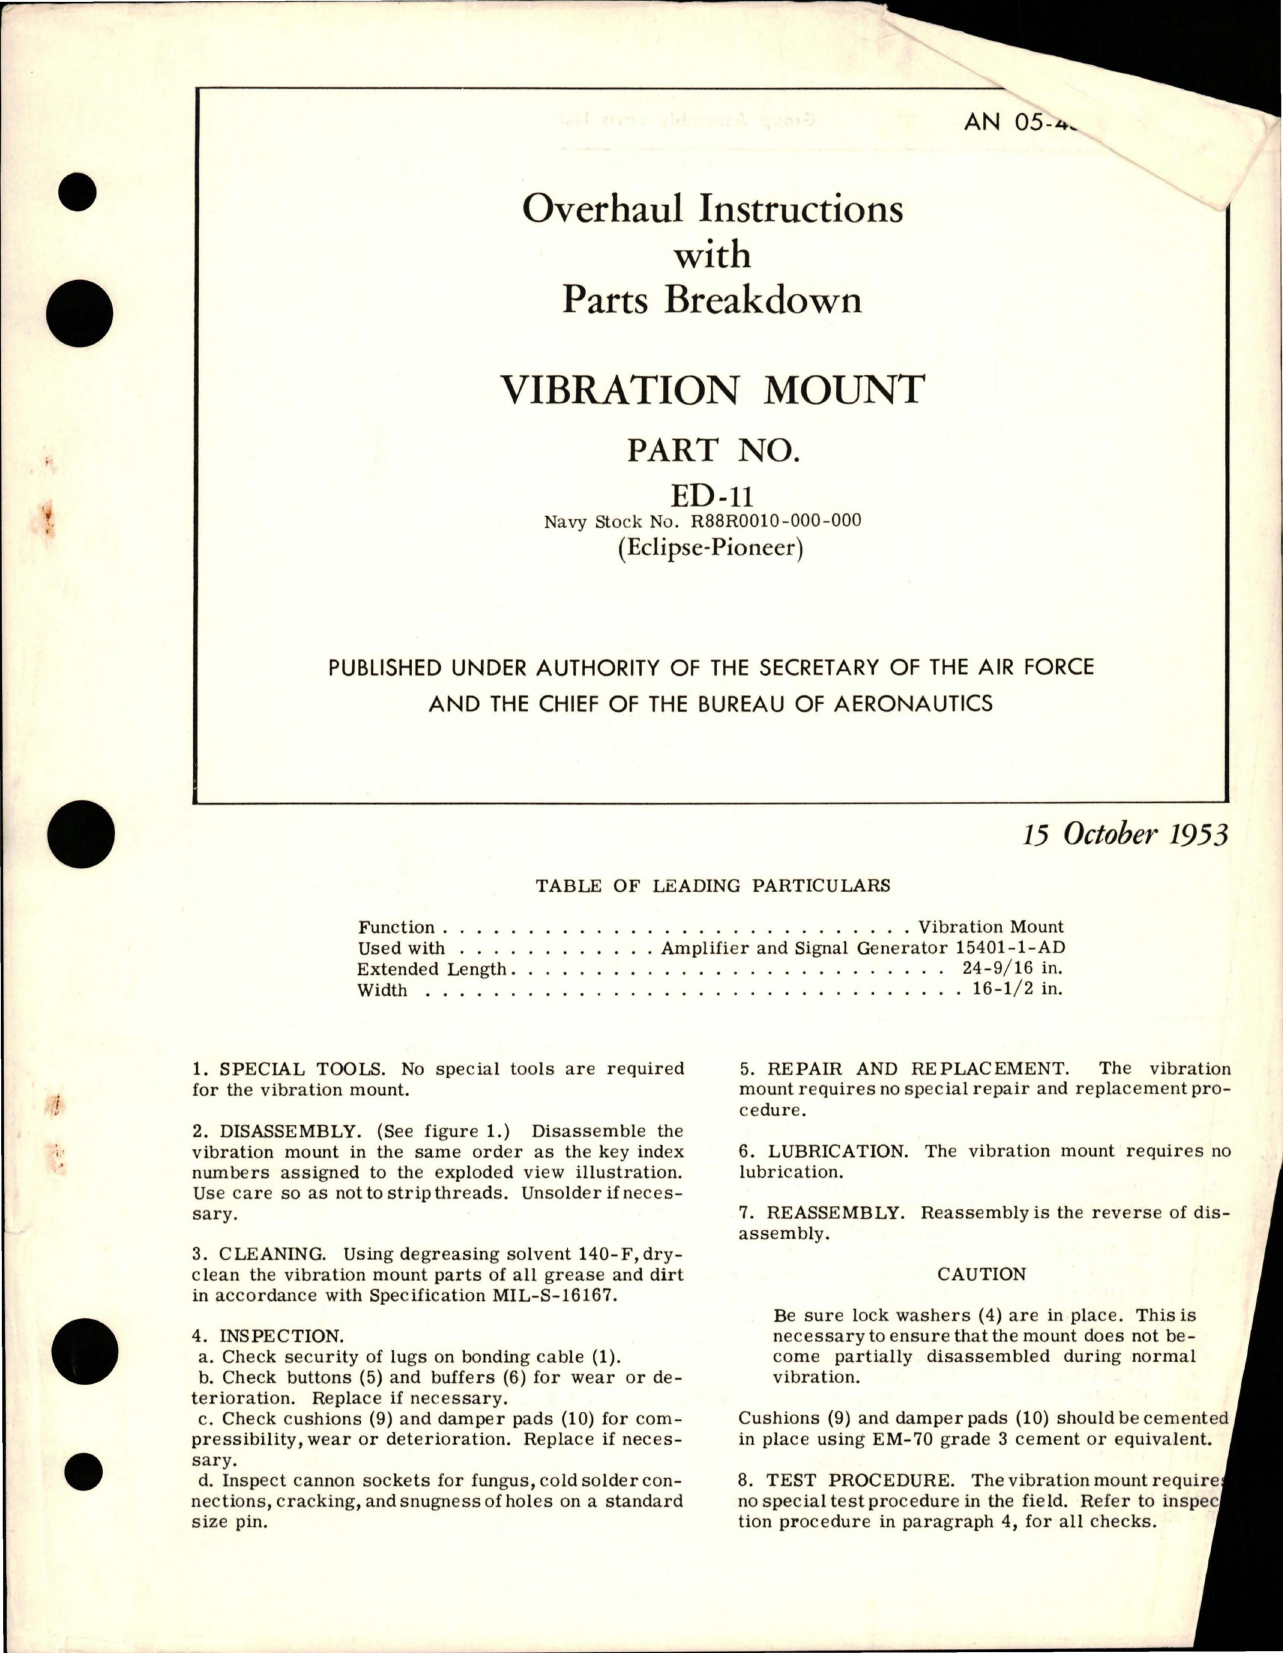 Sample page 1 from AirCorps Library document: Overhaul Instructions with Parts Breakdown for Vibration Mount - Part ED-11